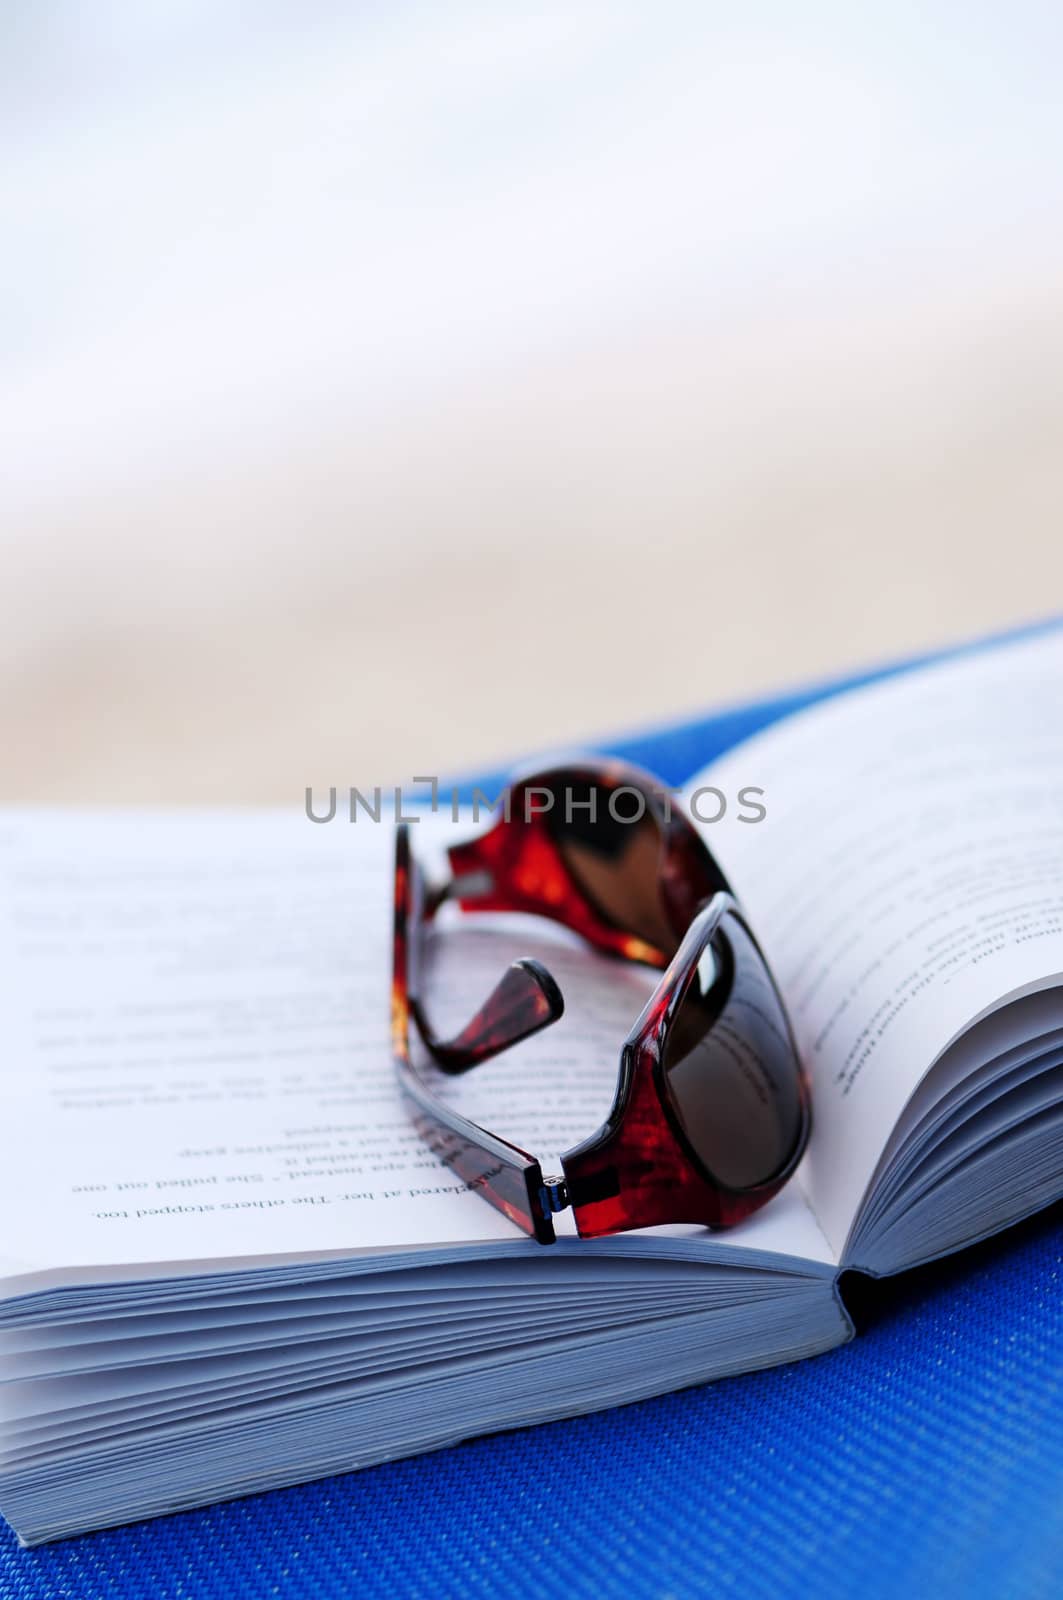 Sunglasses and book on beach chair  by elenathewise